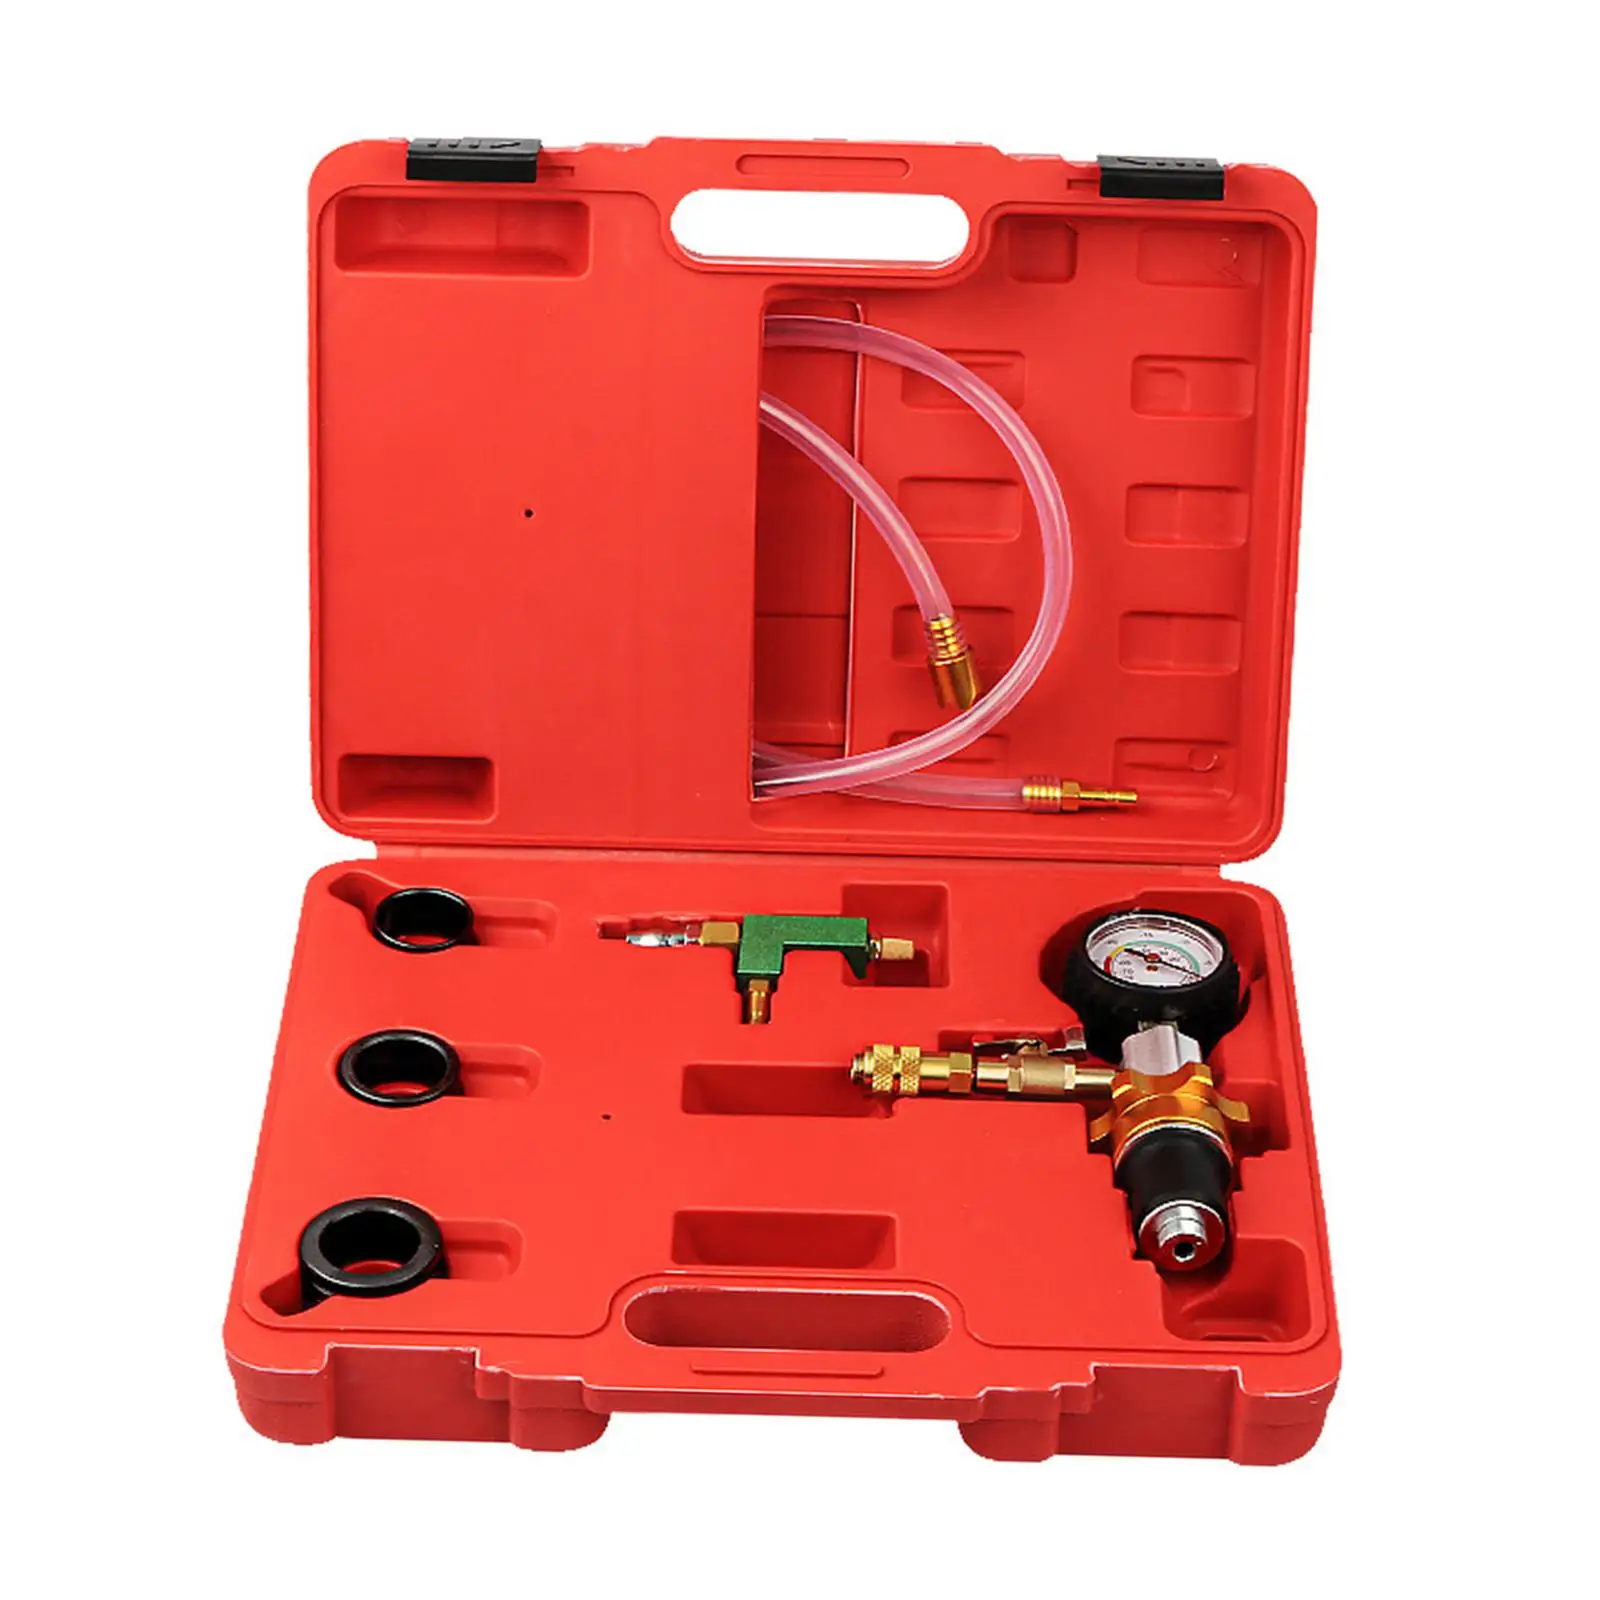 Vacuum Coolant Refill Tool set with 3 Adapters Radiator Pressure Tester for Truck